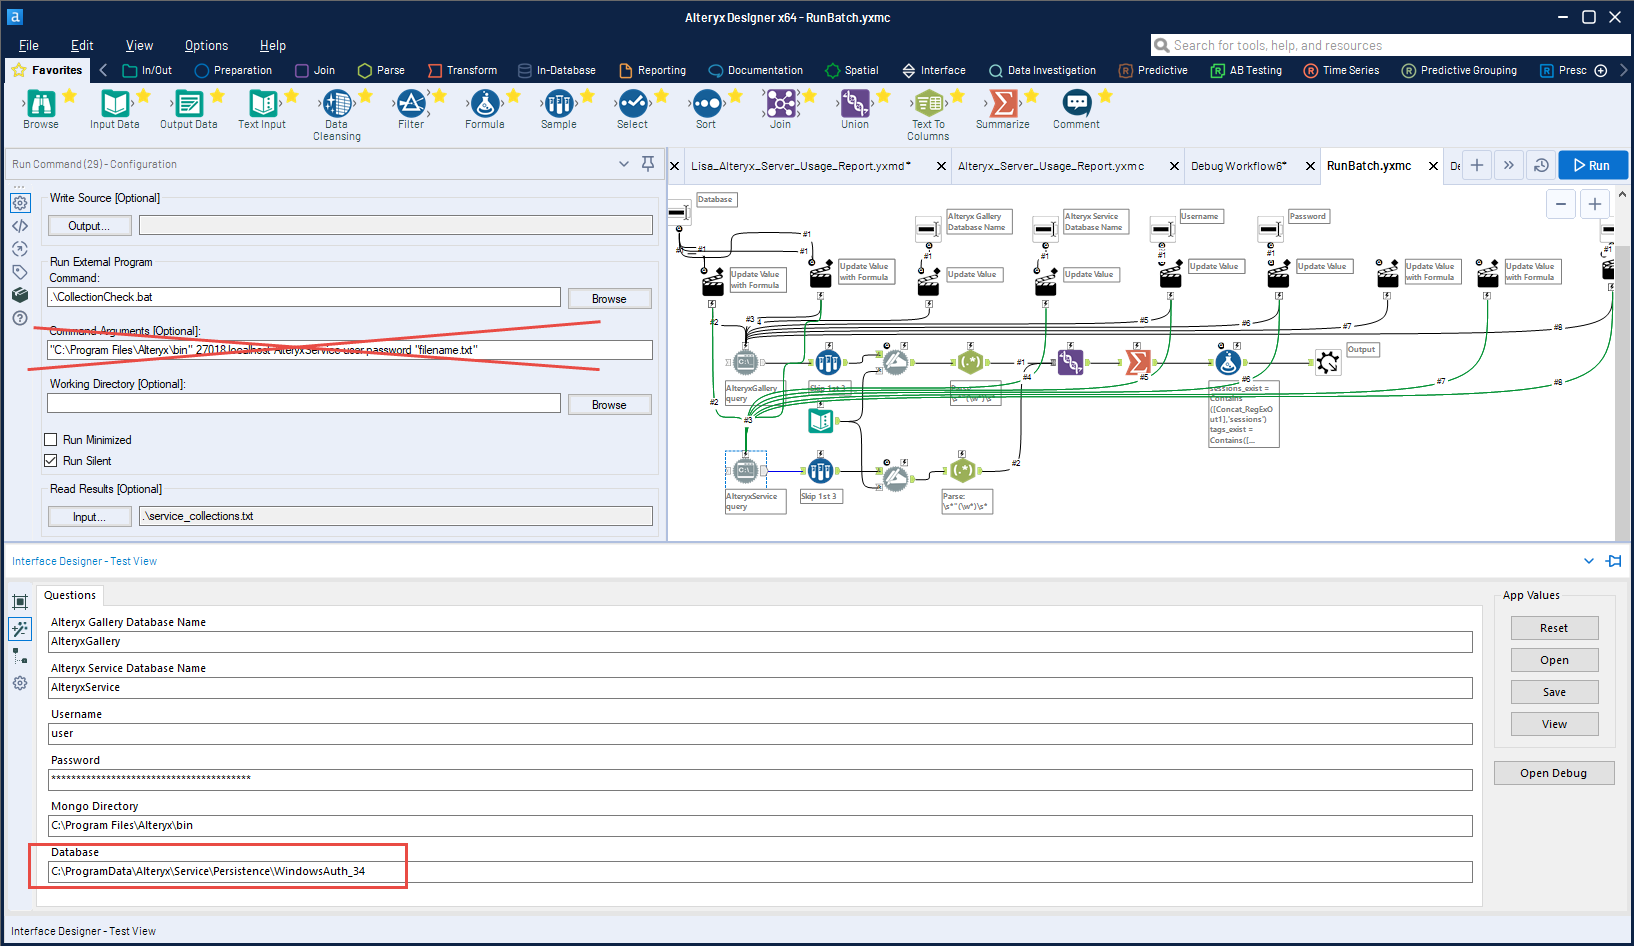 Screen shot of Alteryx Intelligence Suite software.